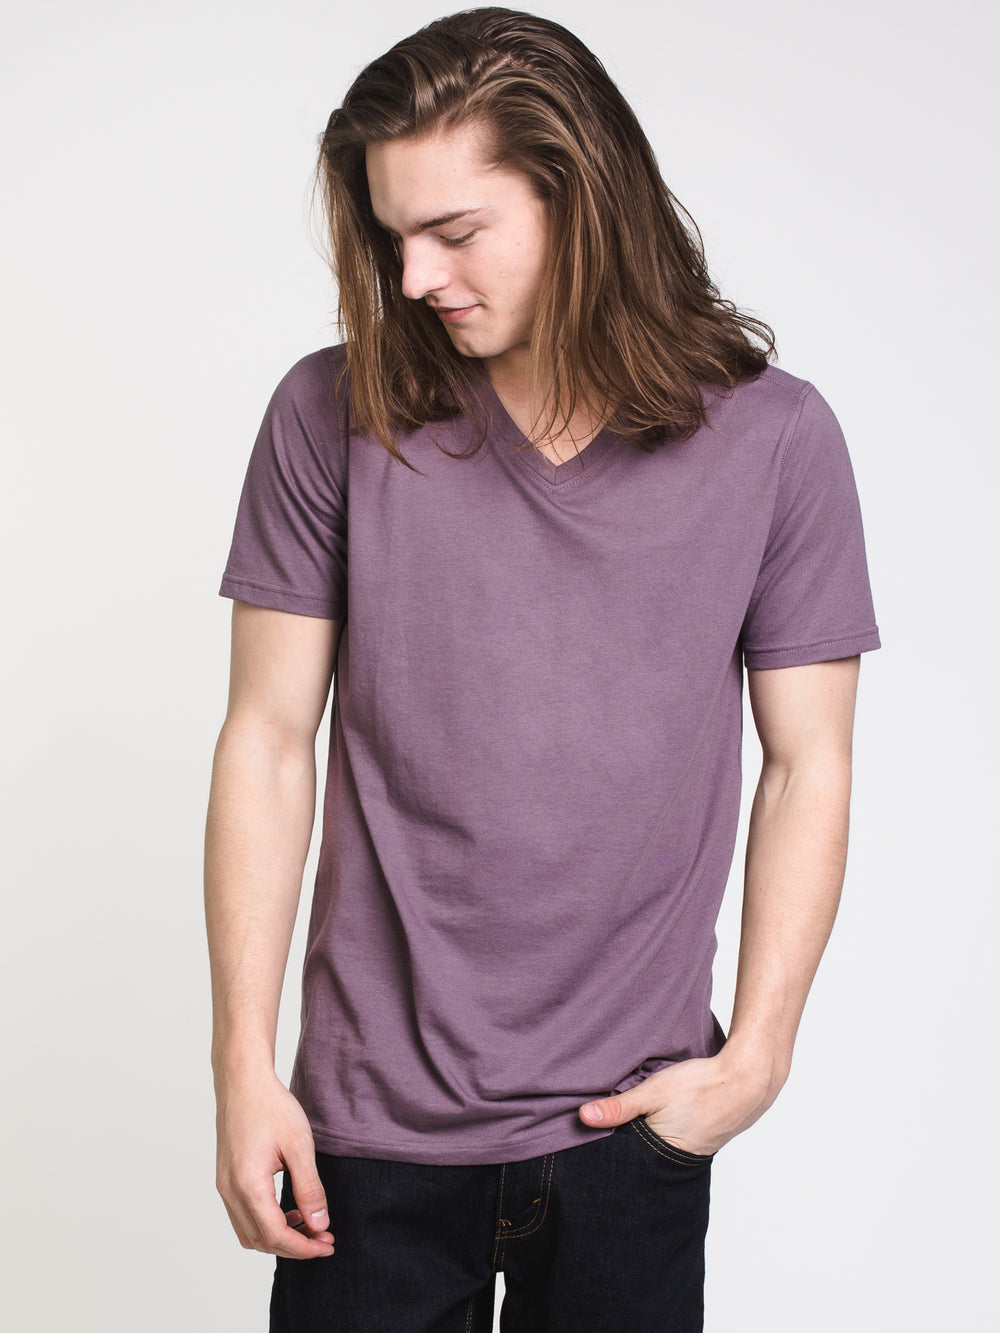 MENS VICTOR VNECK T - LILAC - CLEARANCE